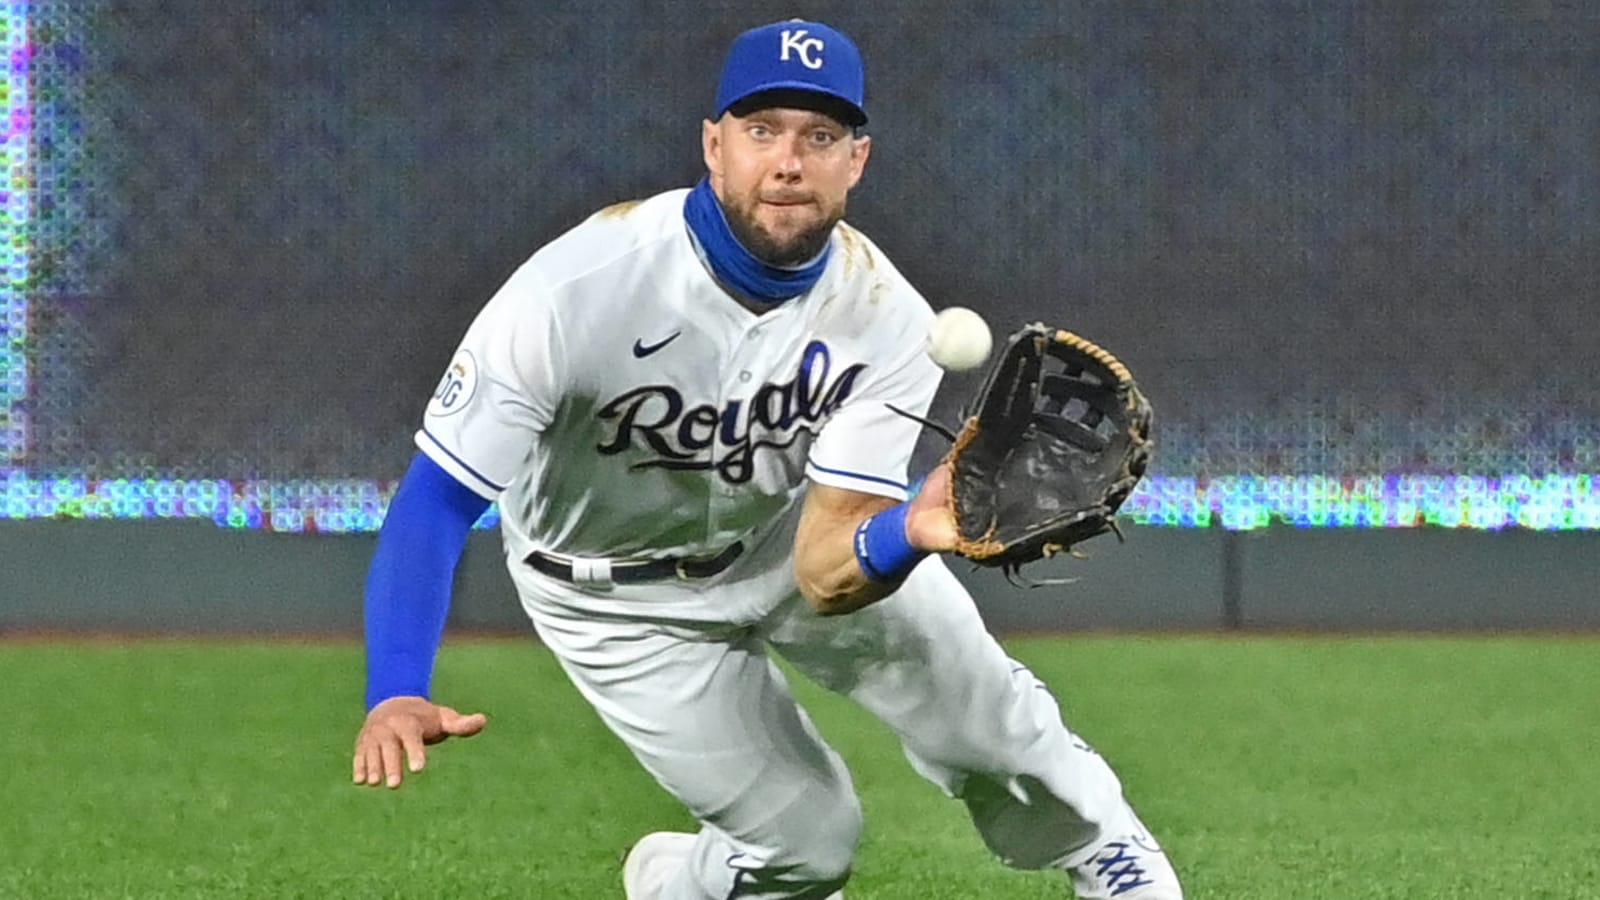 Alex Gordon throws first pitch from left field